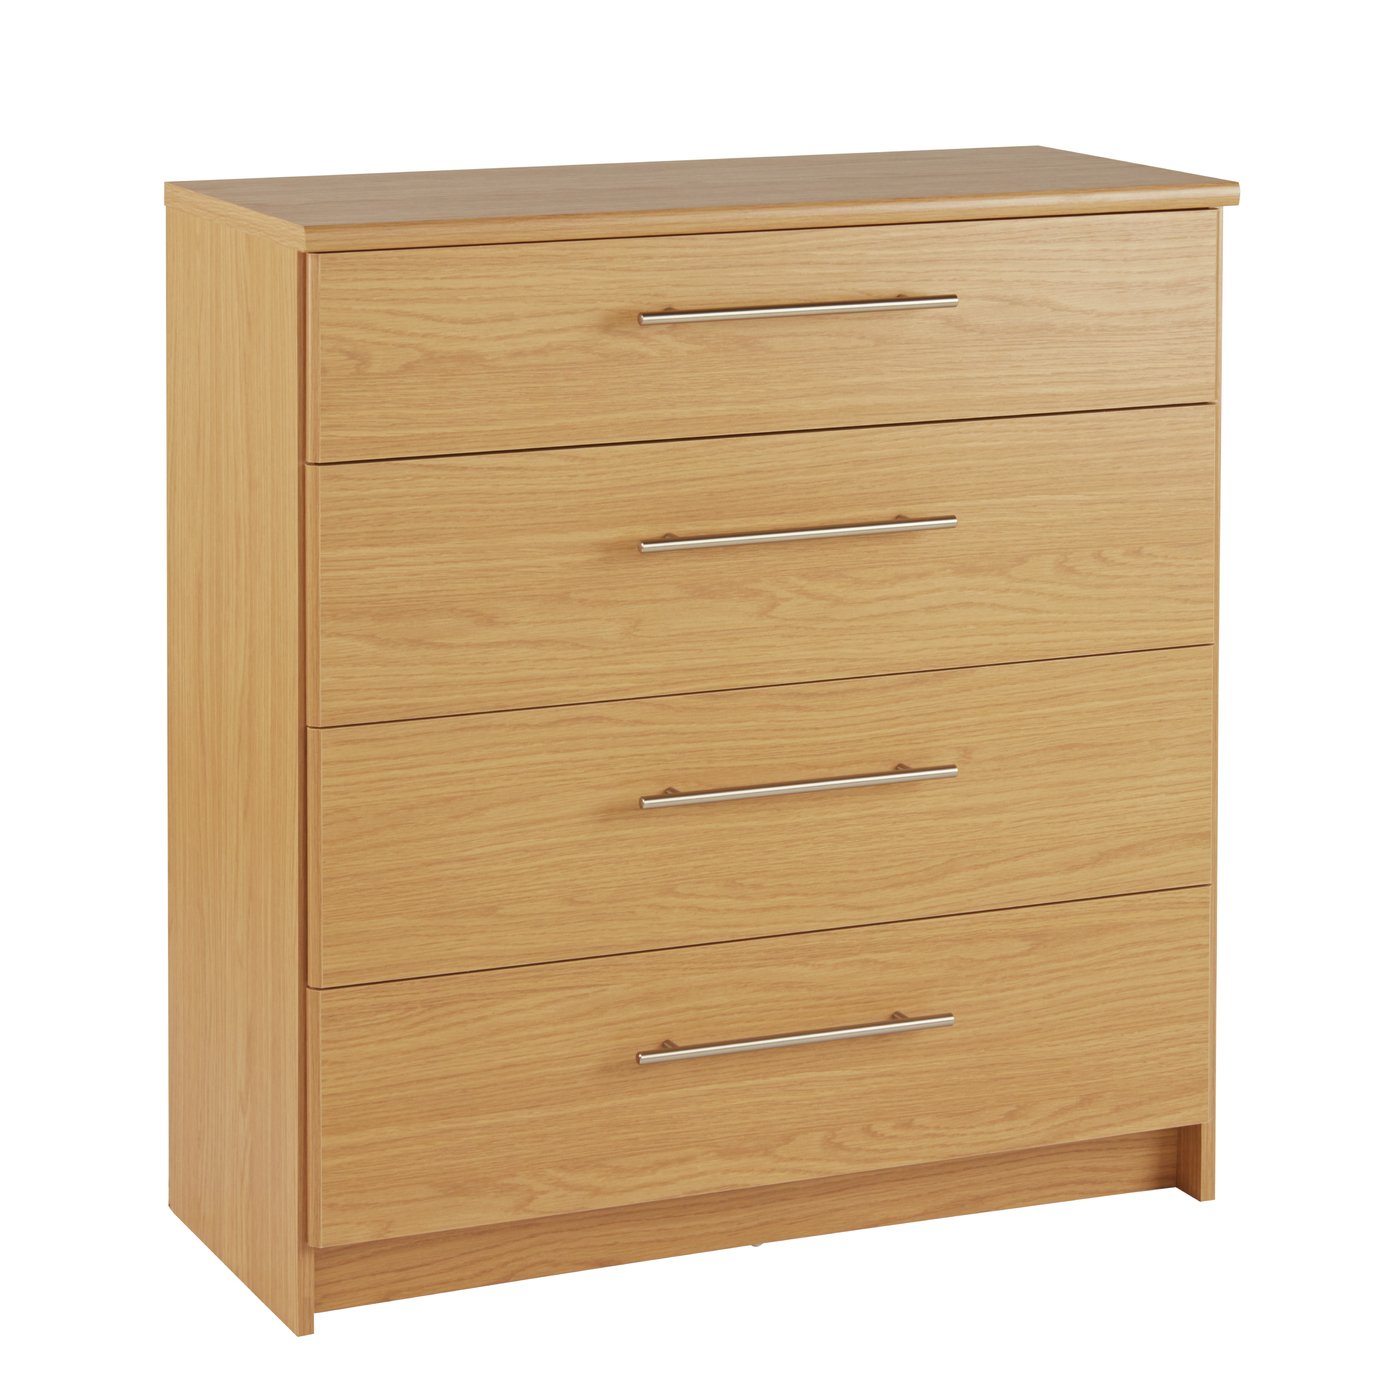 Argos Home Normandy Oak Extra Large 4 Drawer Chest